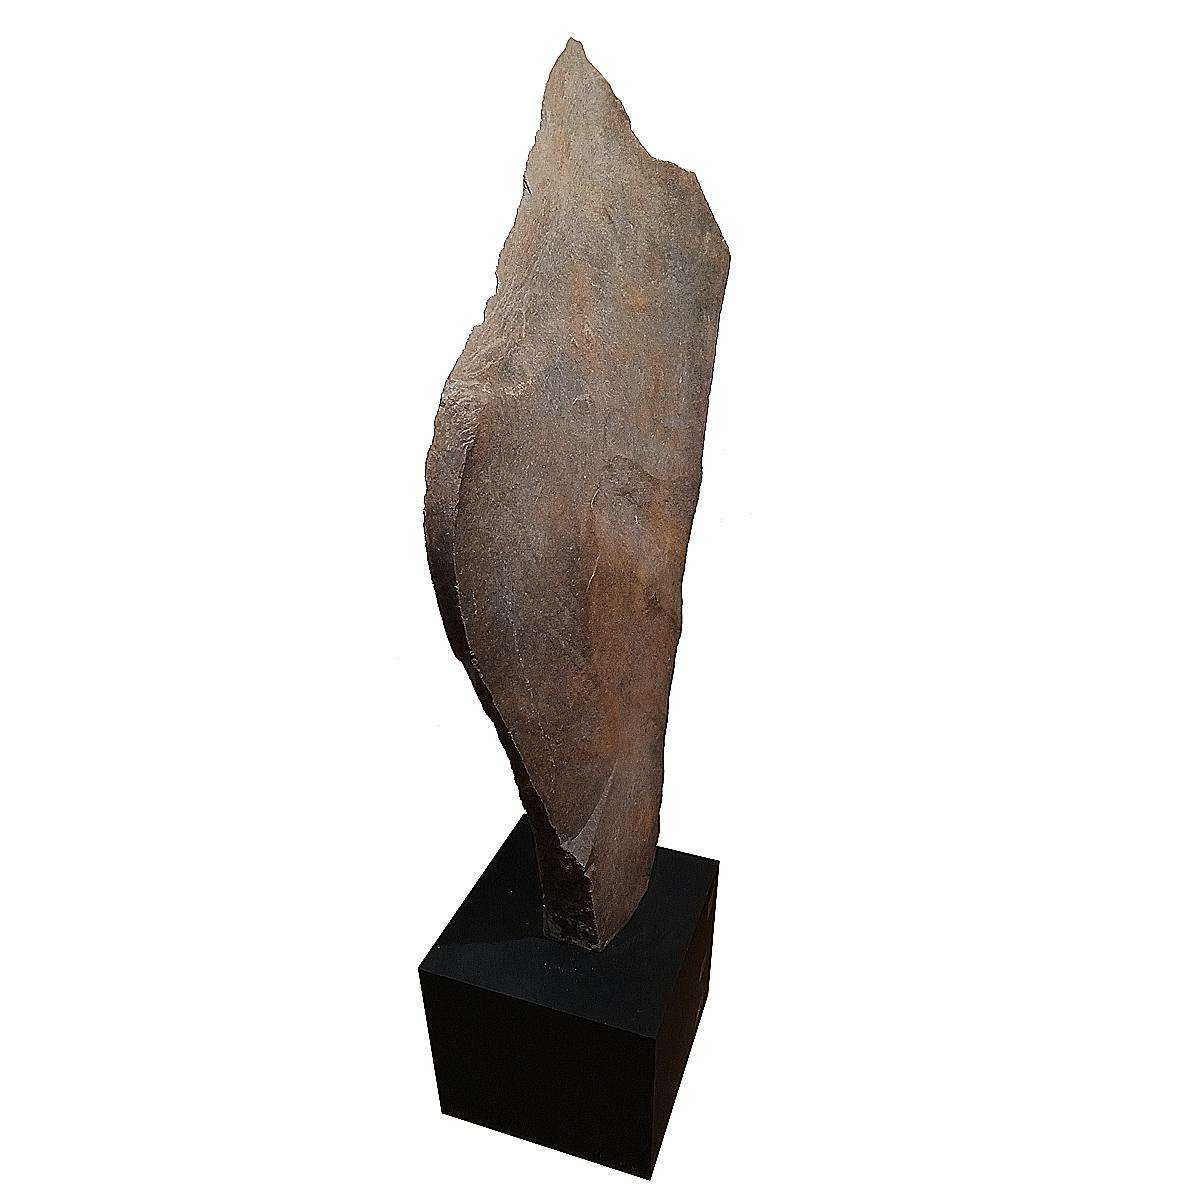 Organic Modern Large Indonesian Stone Sculpture on Stand, Wide Slate For Sale